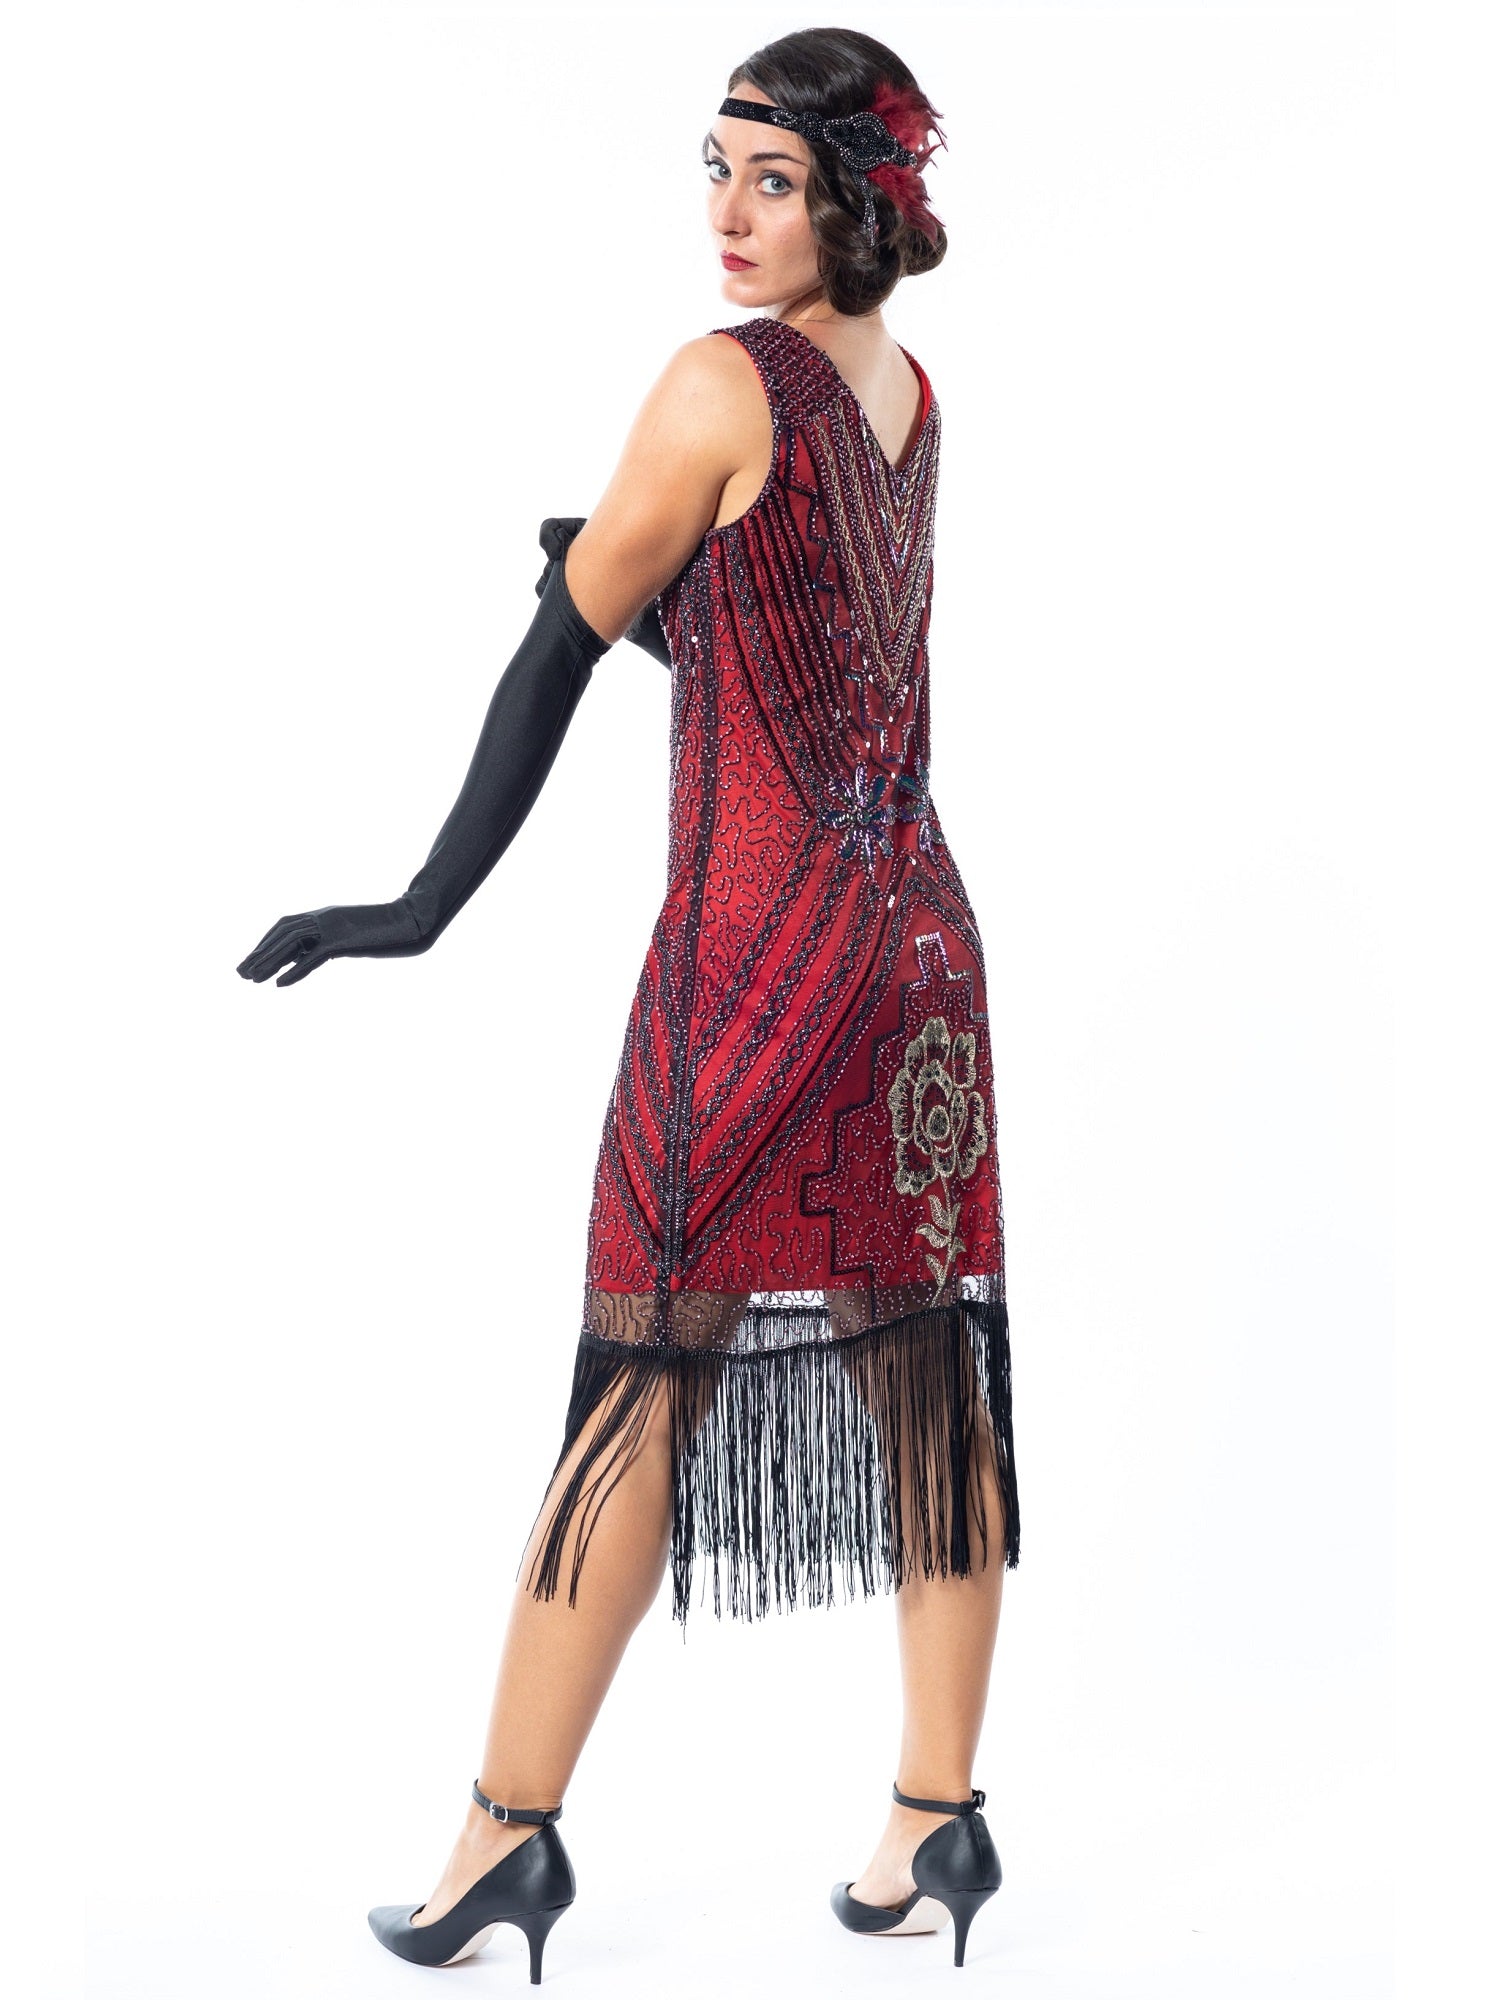 A Red Vintage Gatsby Dress with black and gold sequins, beads and fringes around the hem - Back View